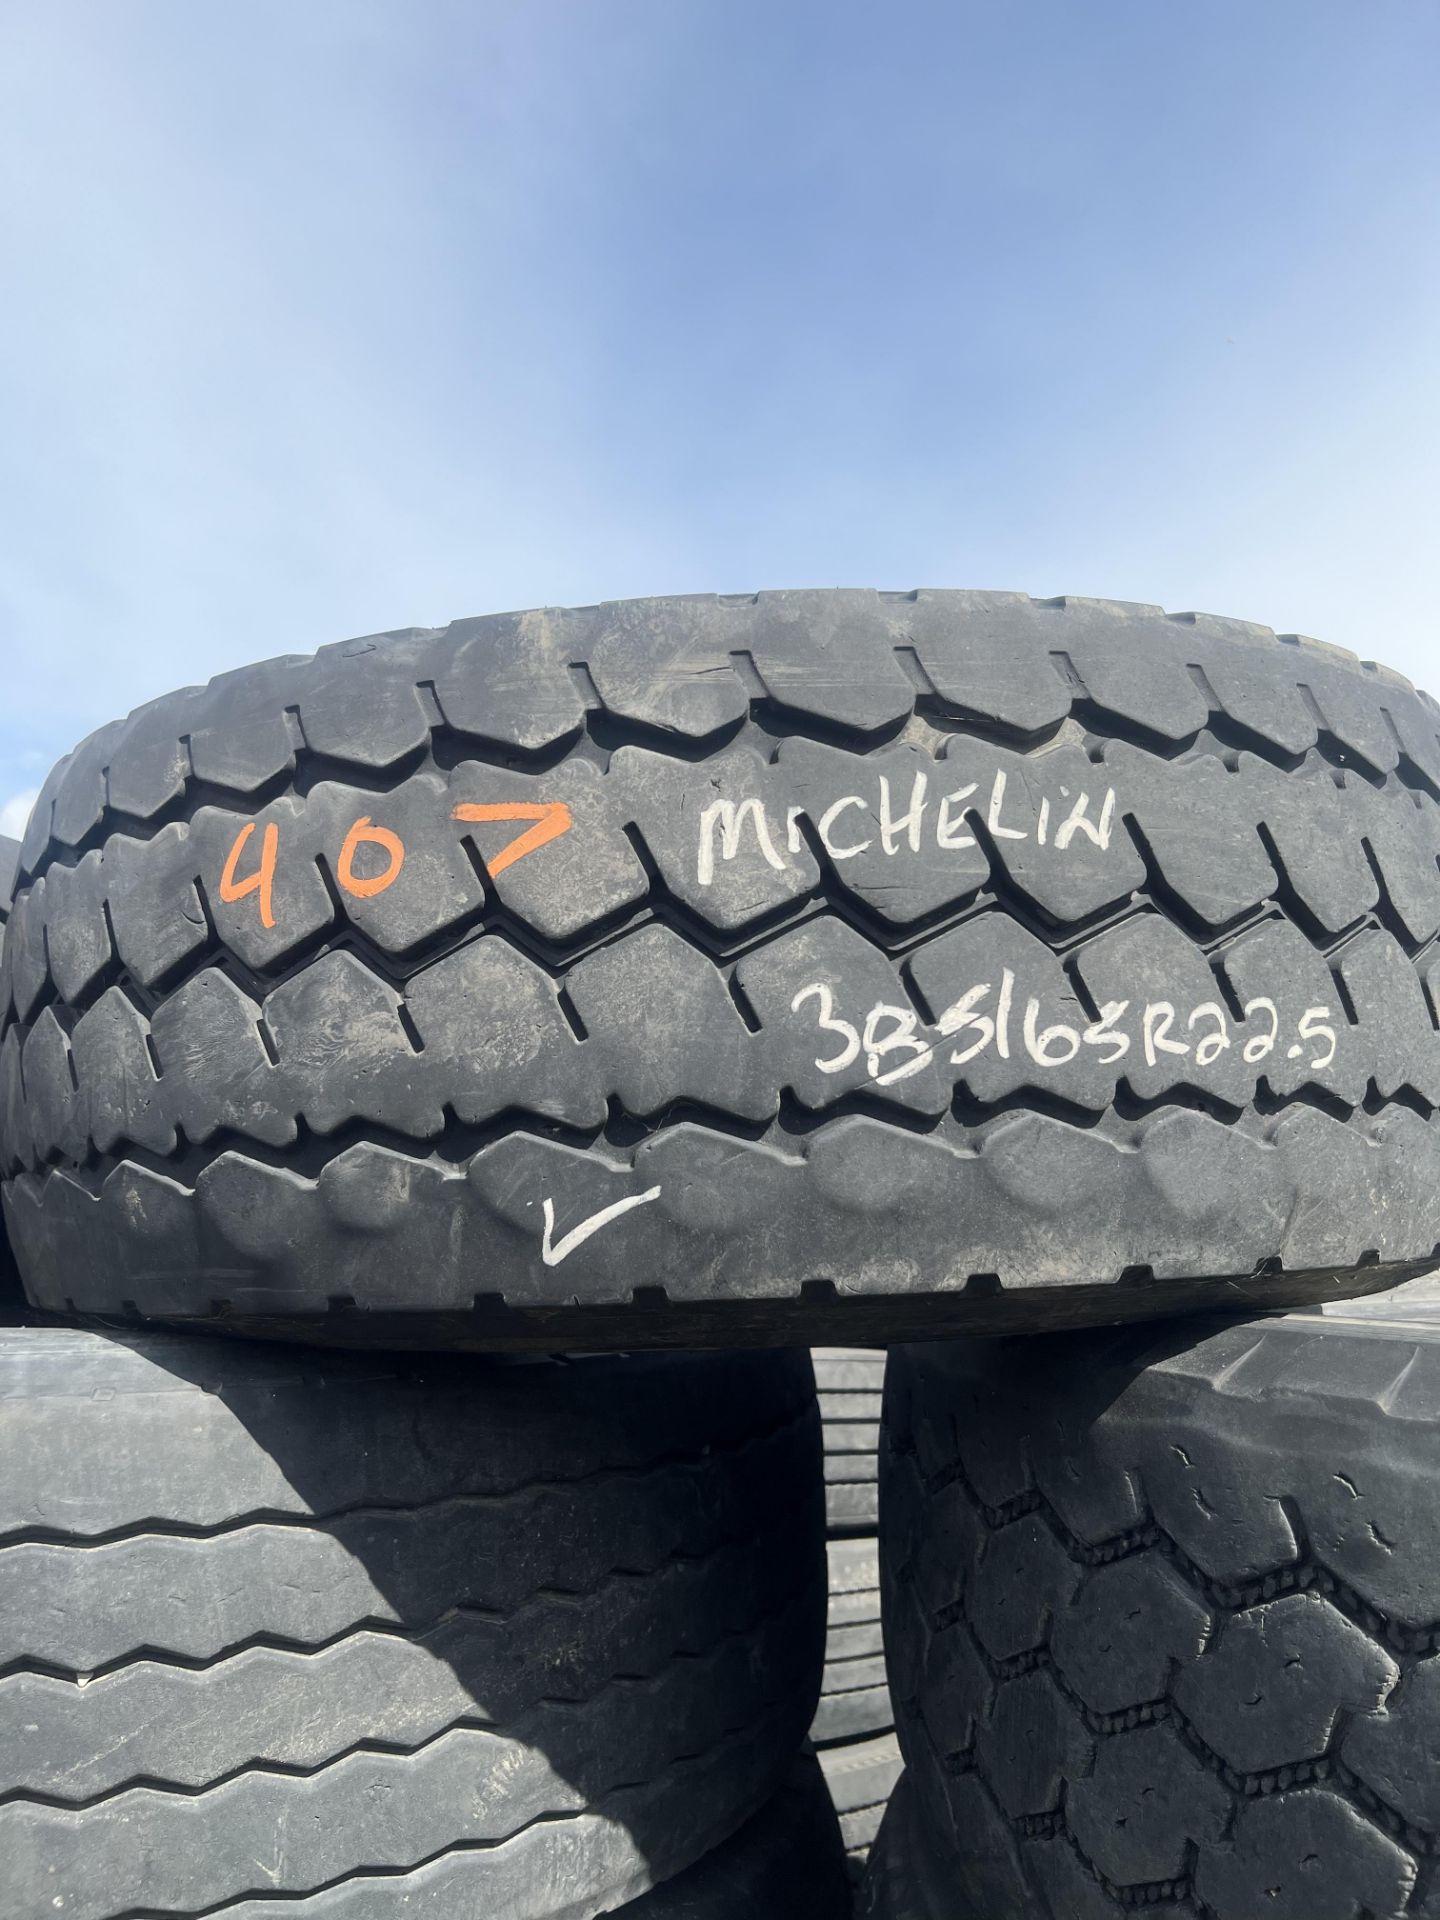 TRUCK_MICHELIN 385/65R22.5 - Image 2 of 3